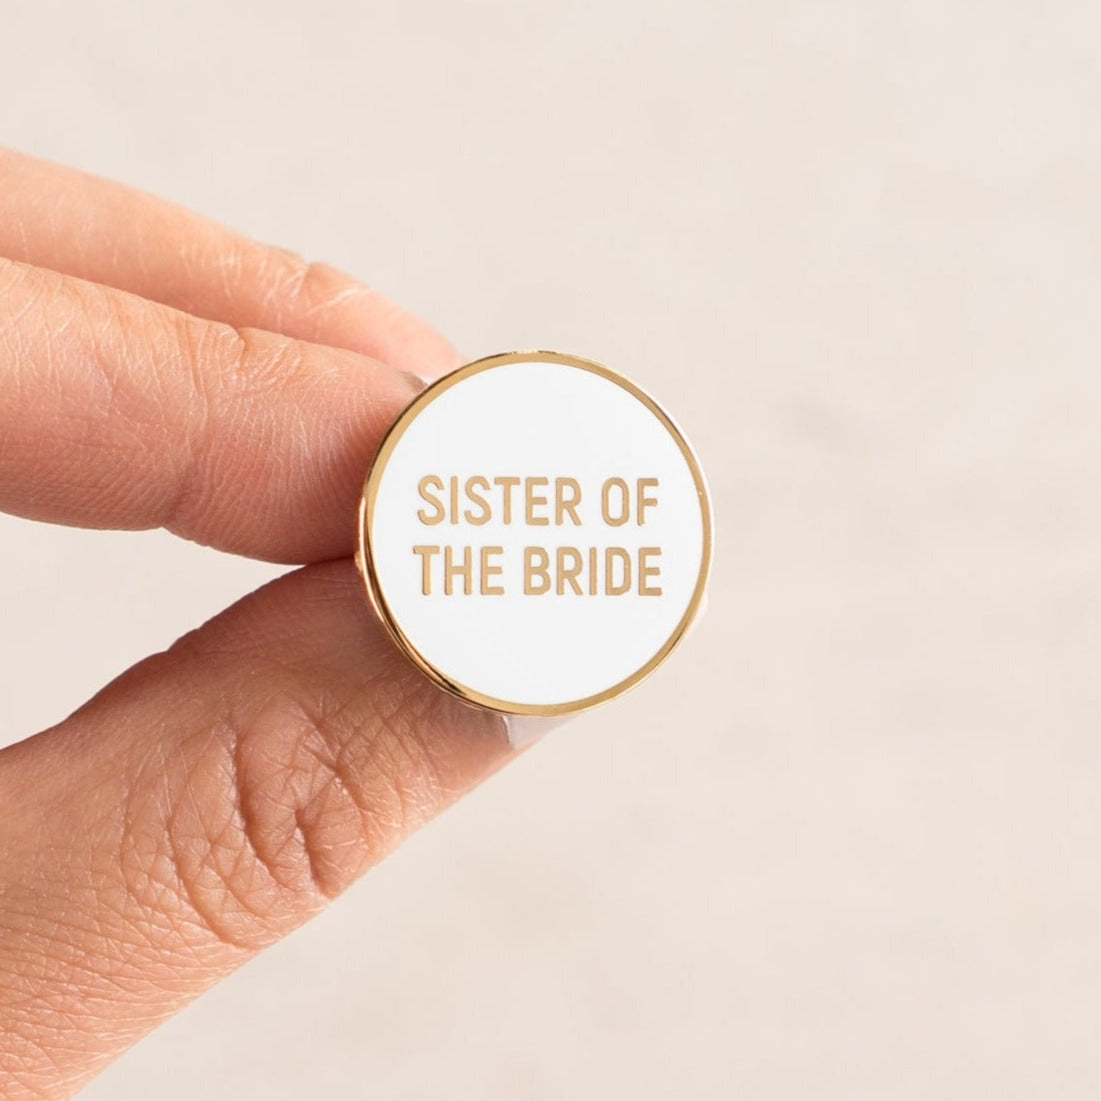 
                  
                    Sister Of The Bride Pin | Palm and Posy
                  
                